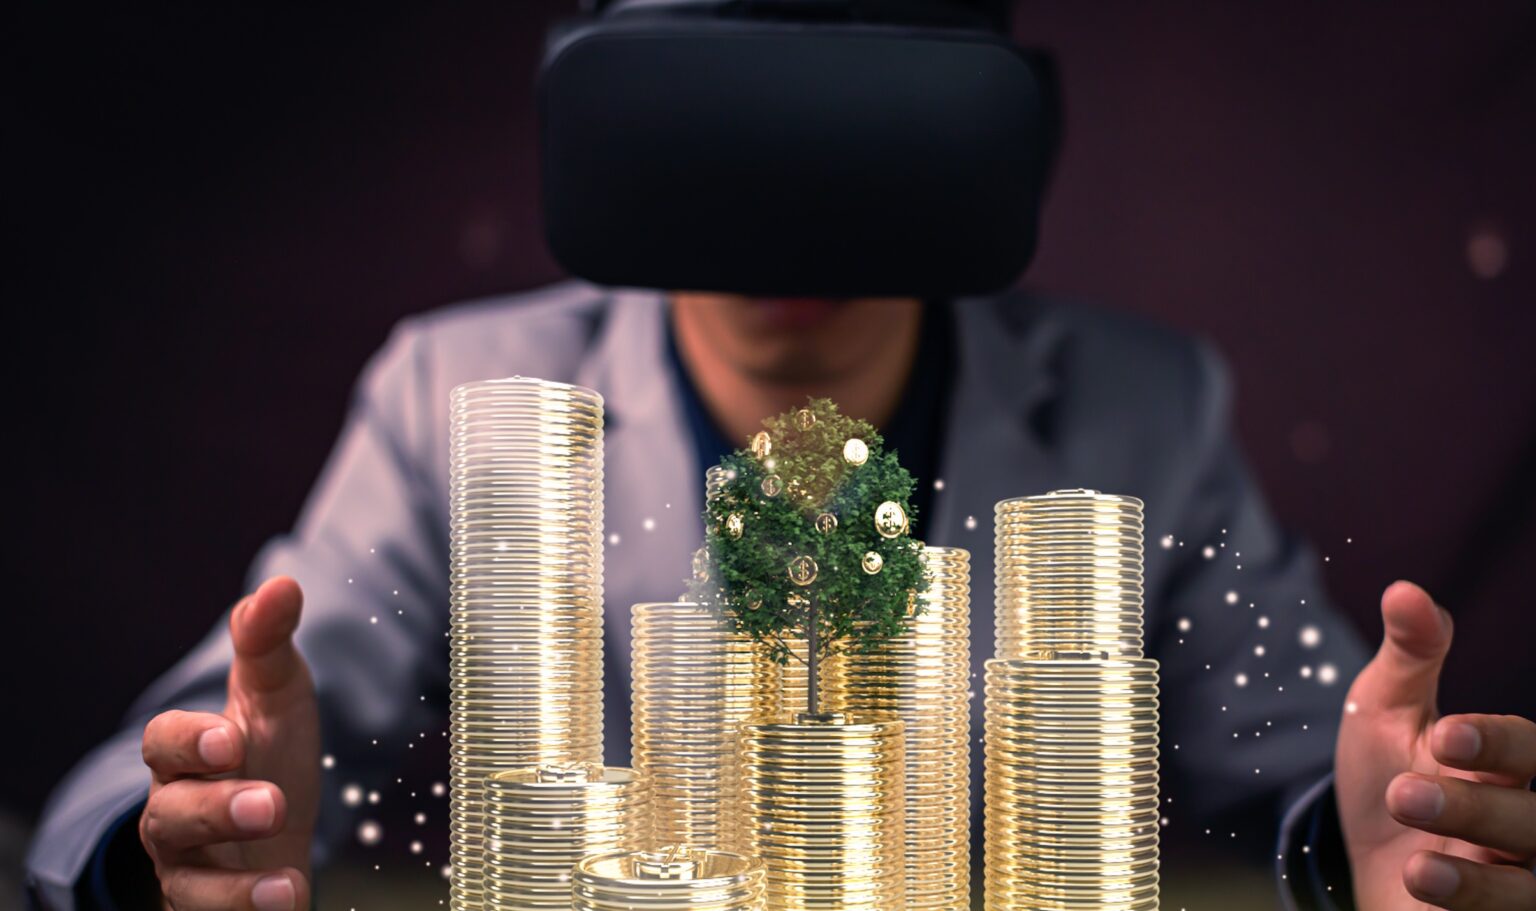 Metaverse Market to Surge by Over $1 Trillion by 2027, Study Finds